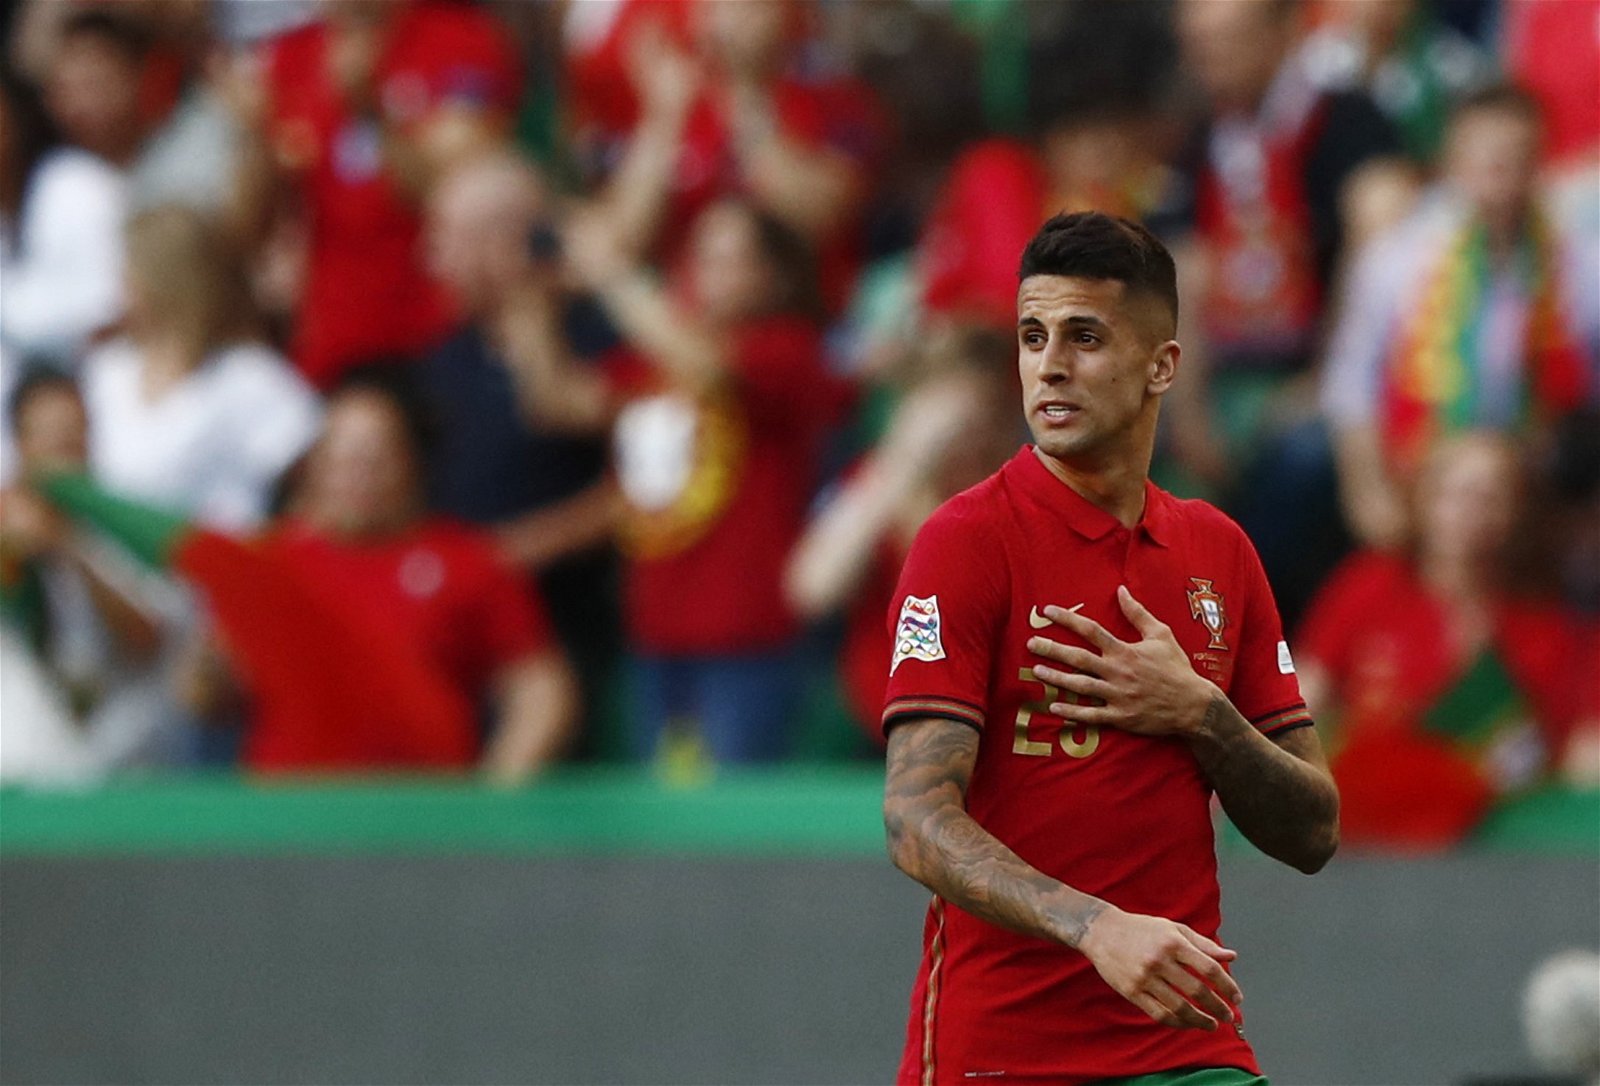 Joao Cancelo - Portugal Players To Watch Out For At World Cup